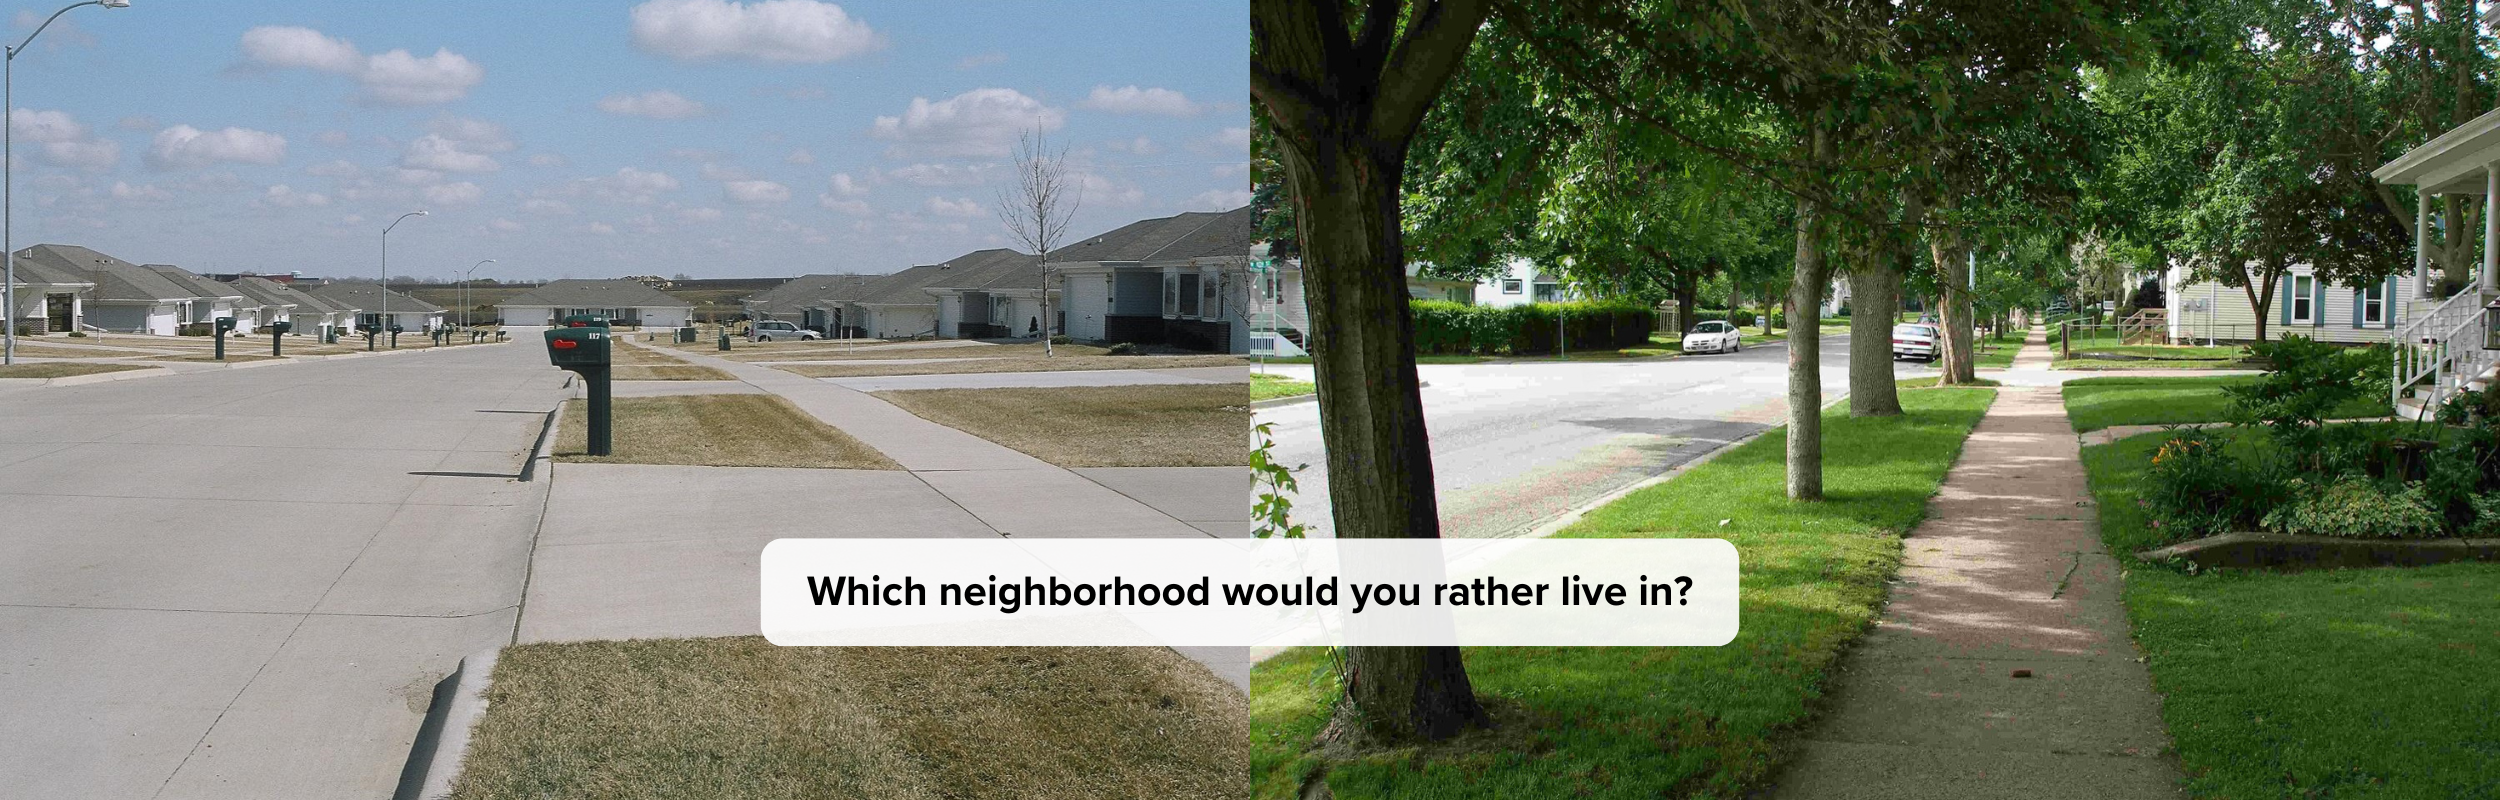 Image of two neighborhoods, one with no trees, no shade, and brown grass, another with a well shaded sidewalk and lots of big trees, green grass. 